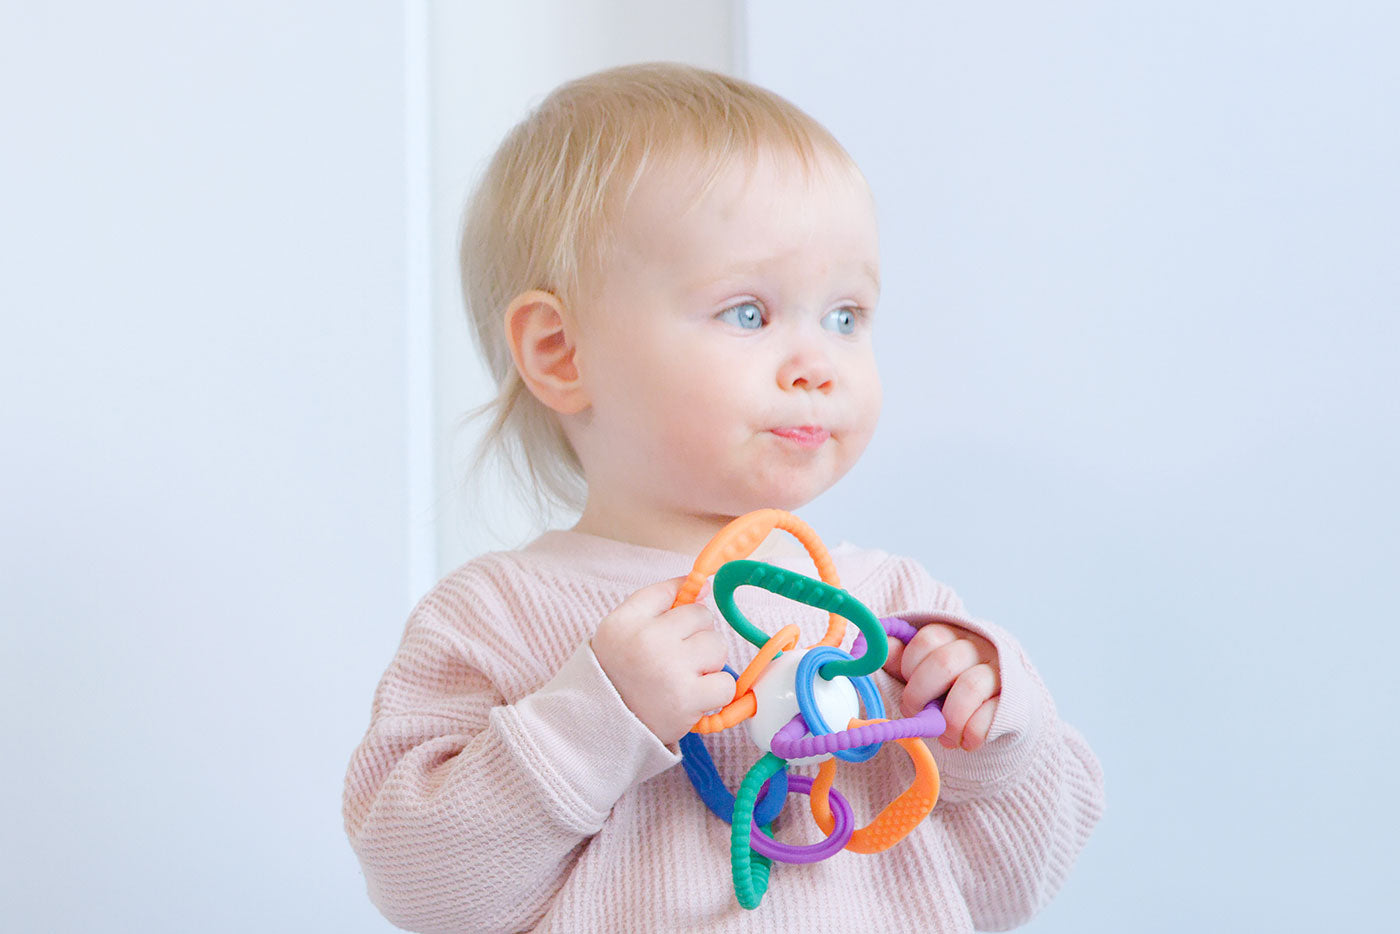 Quark Announces the Launch of its Sensory Teething Ball - Thiingy